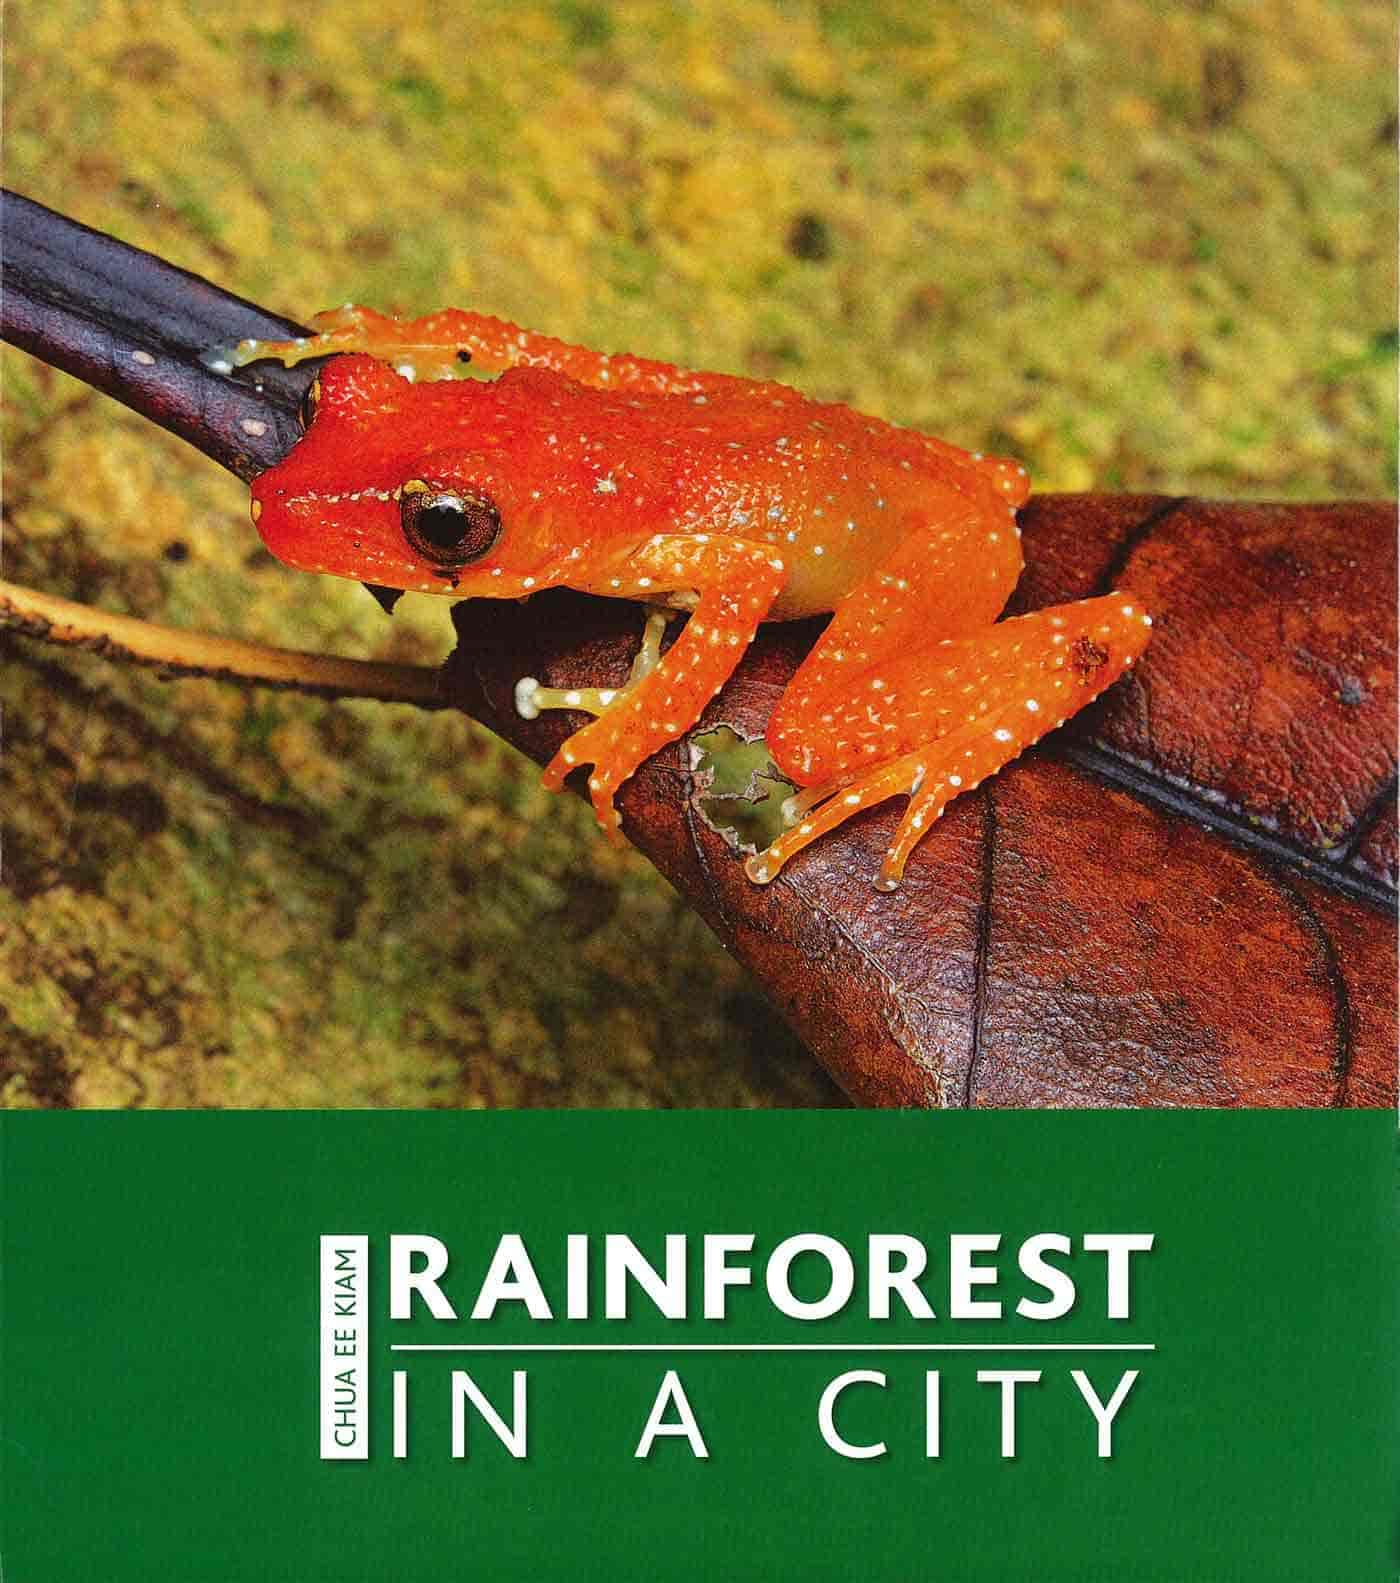 Rainforest in a City